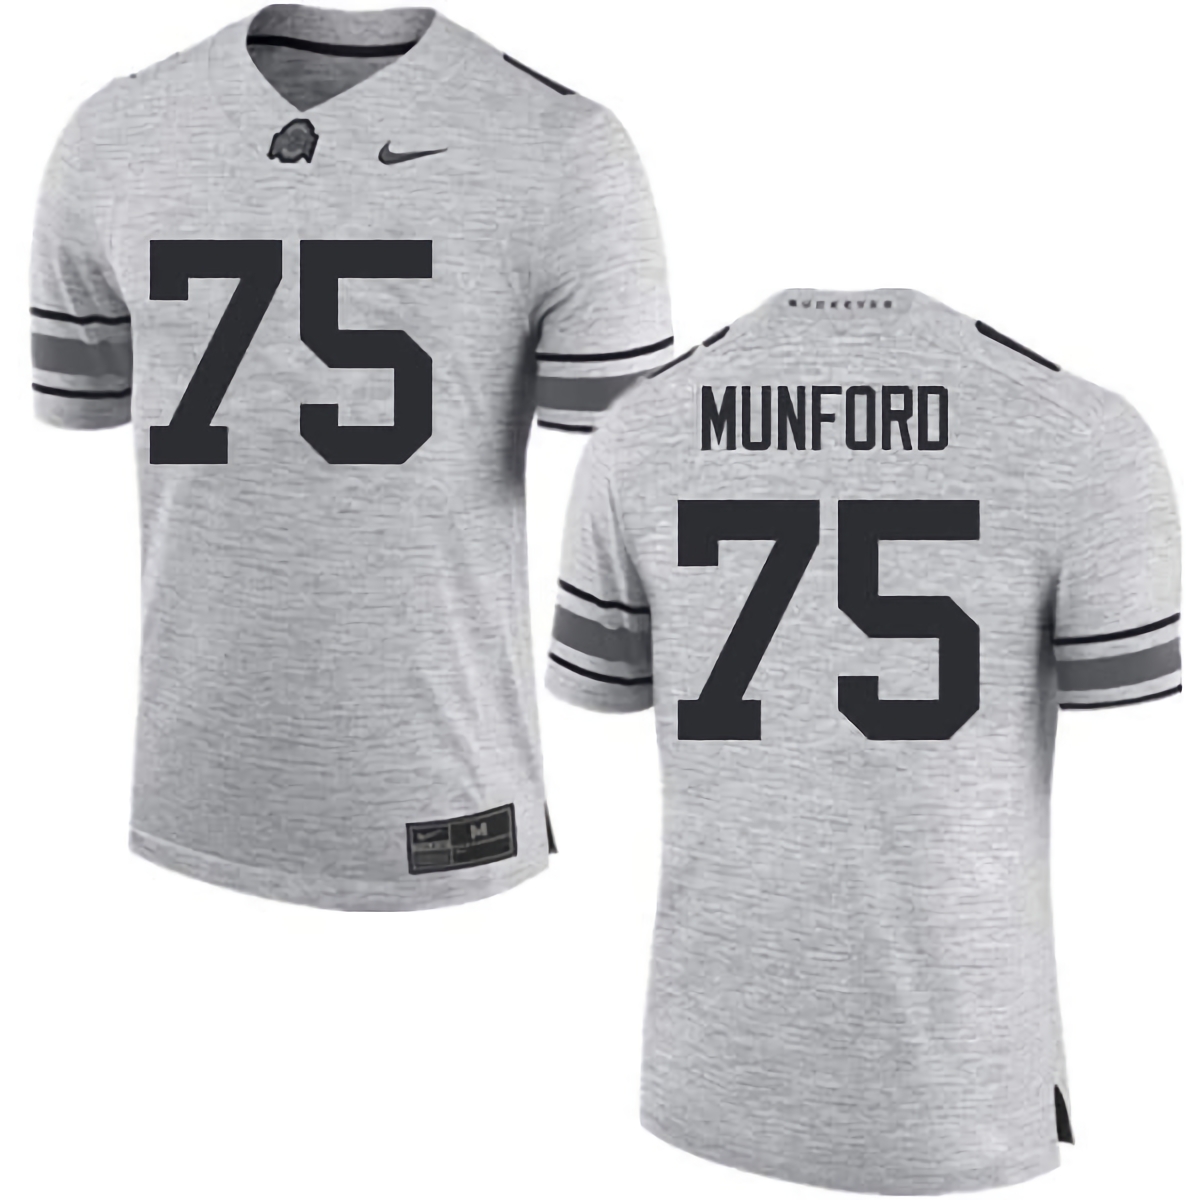 Thayer Munford Ohio State Buckeyes Men's NCAA #75 Nike Gray College Stitched Football Jersey QKS8256BV